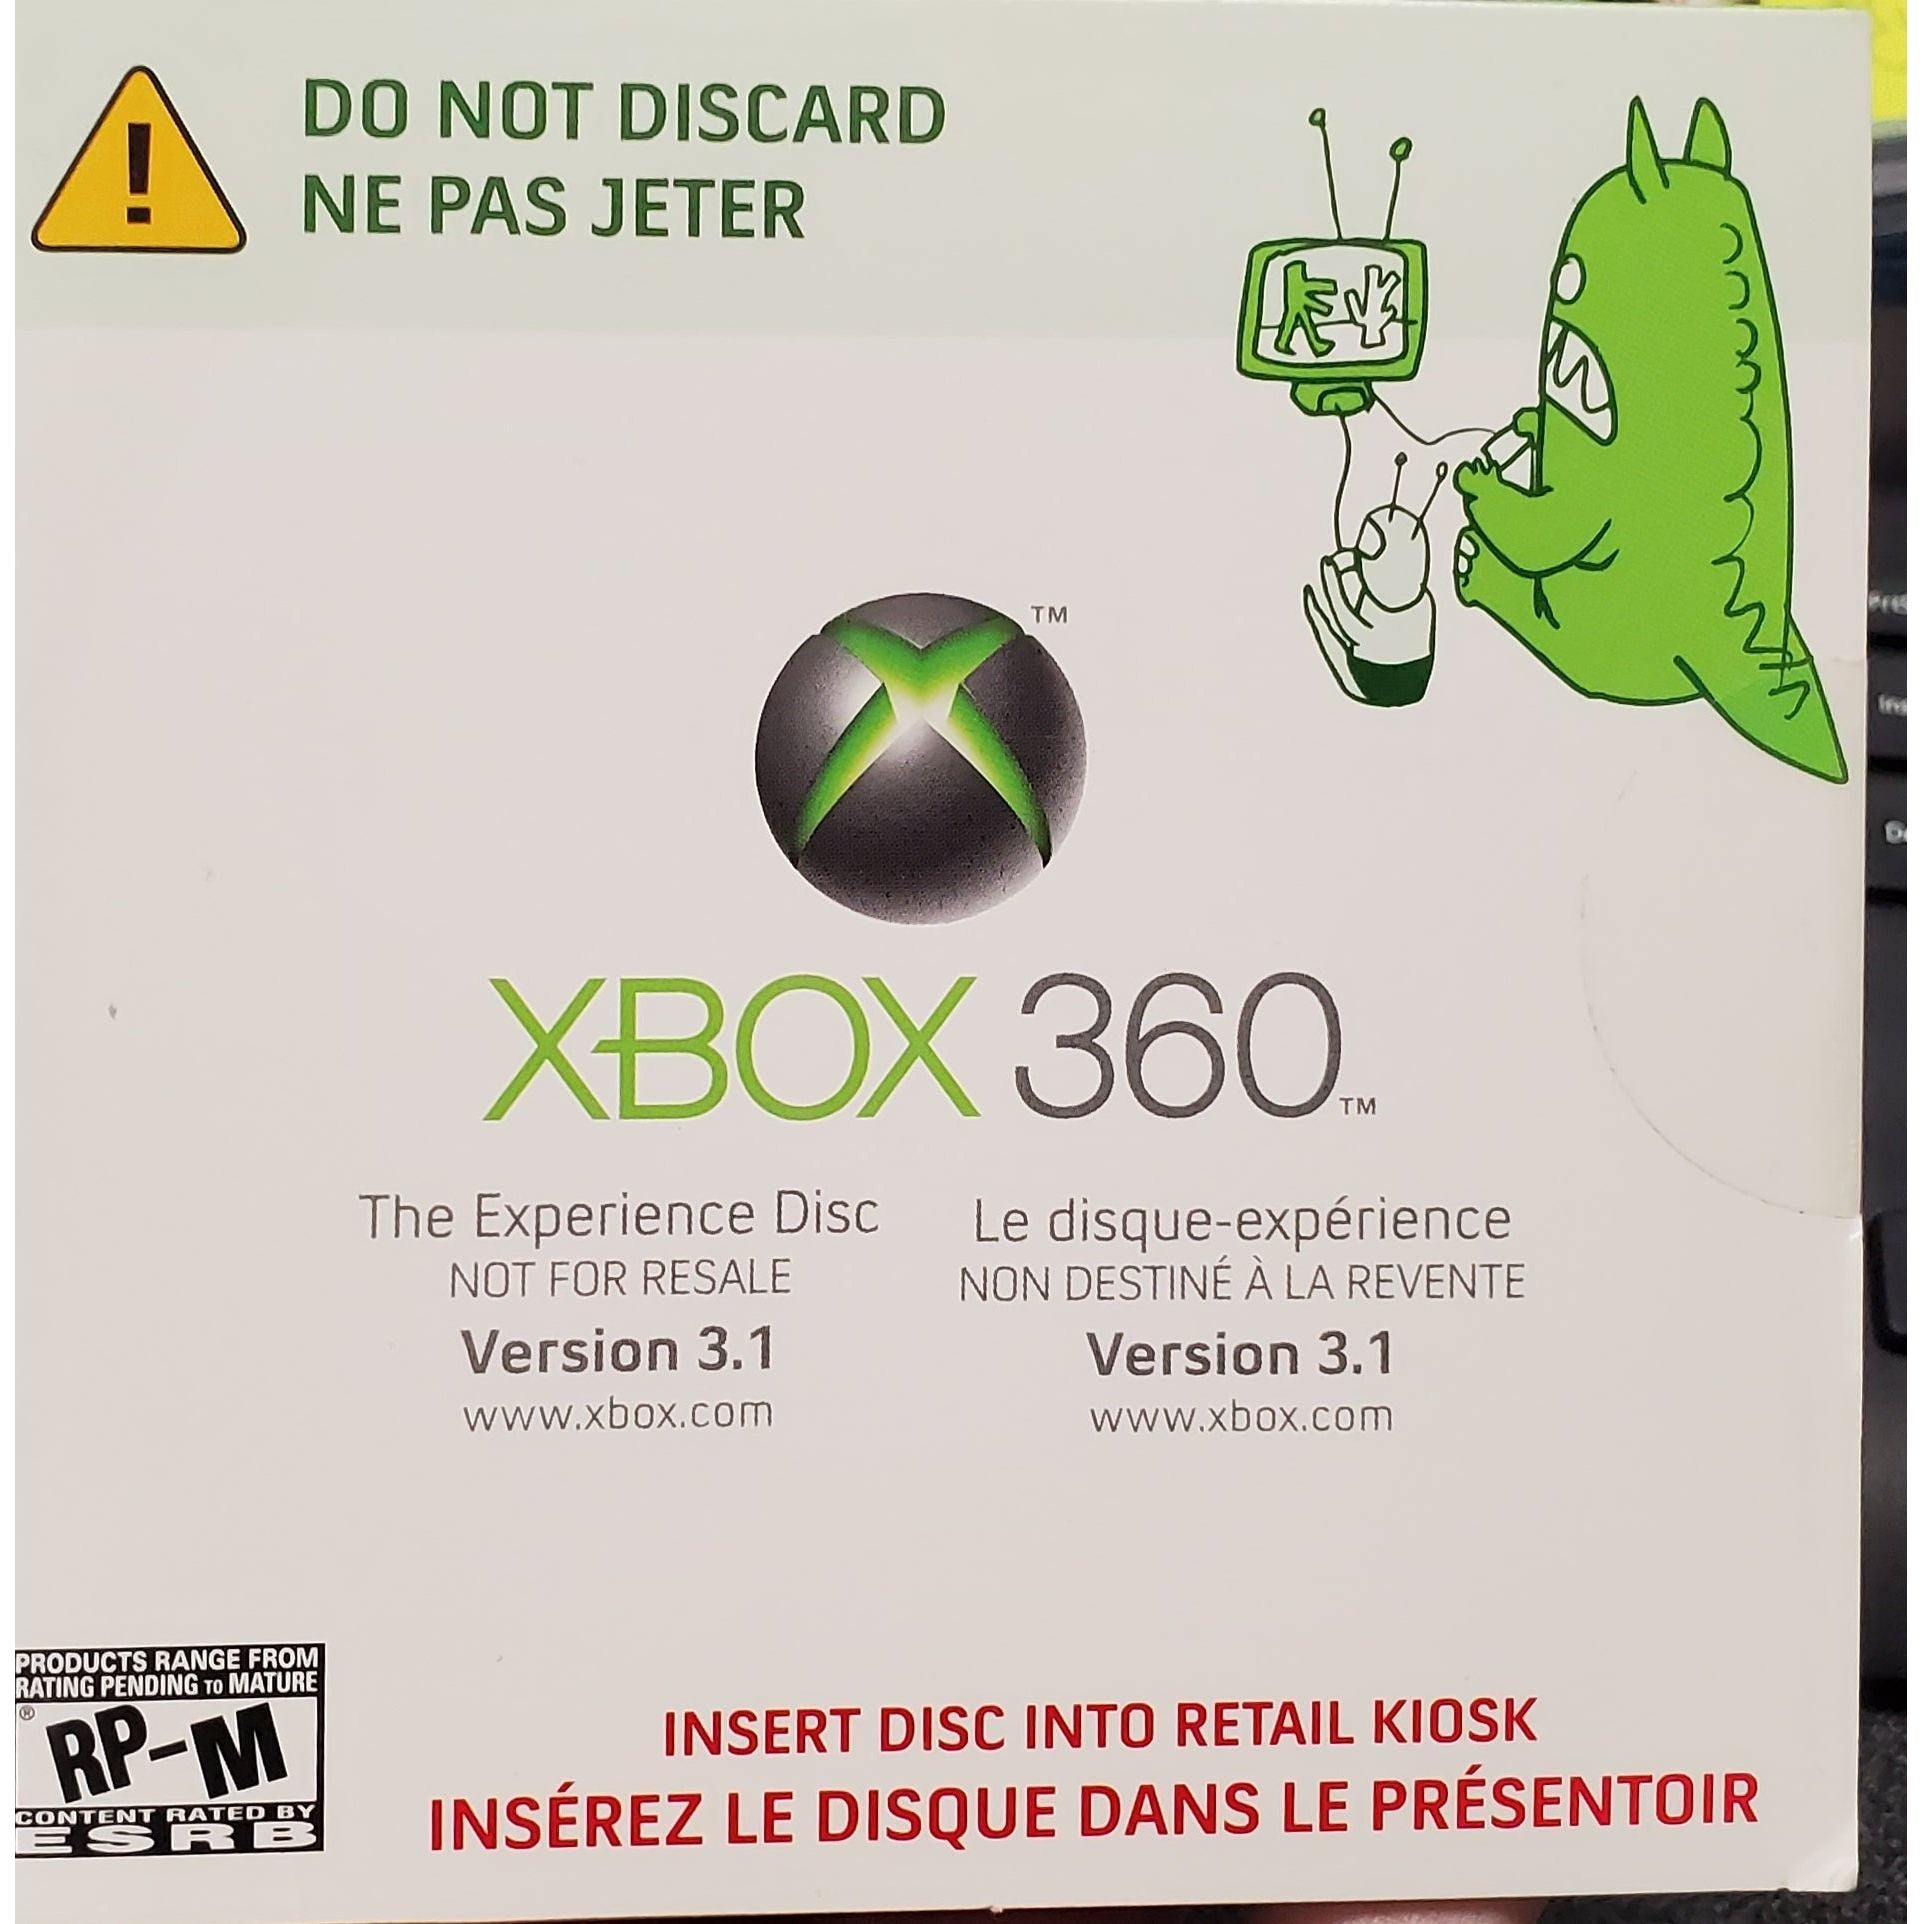 XBOX 360 - Xbox 360 The Experience Disc Version 3.1